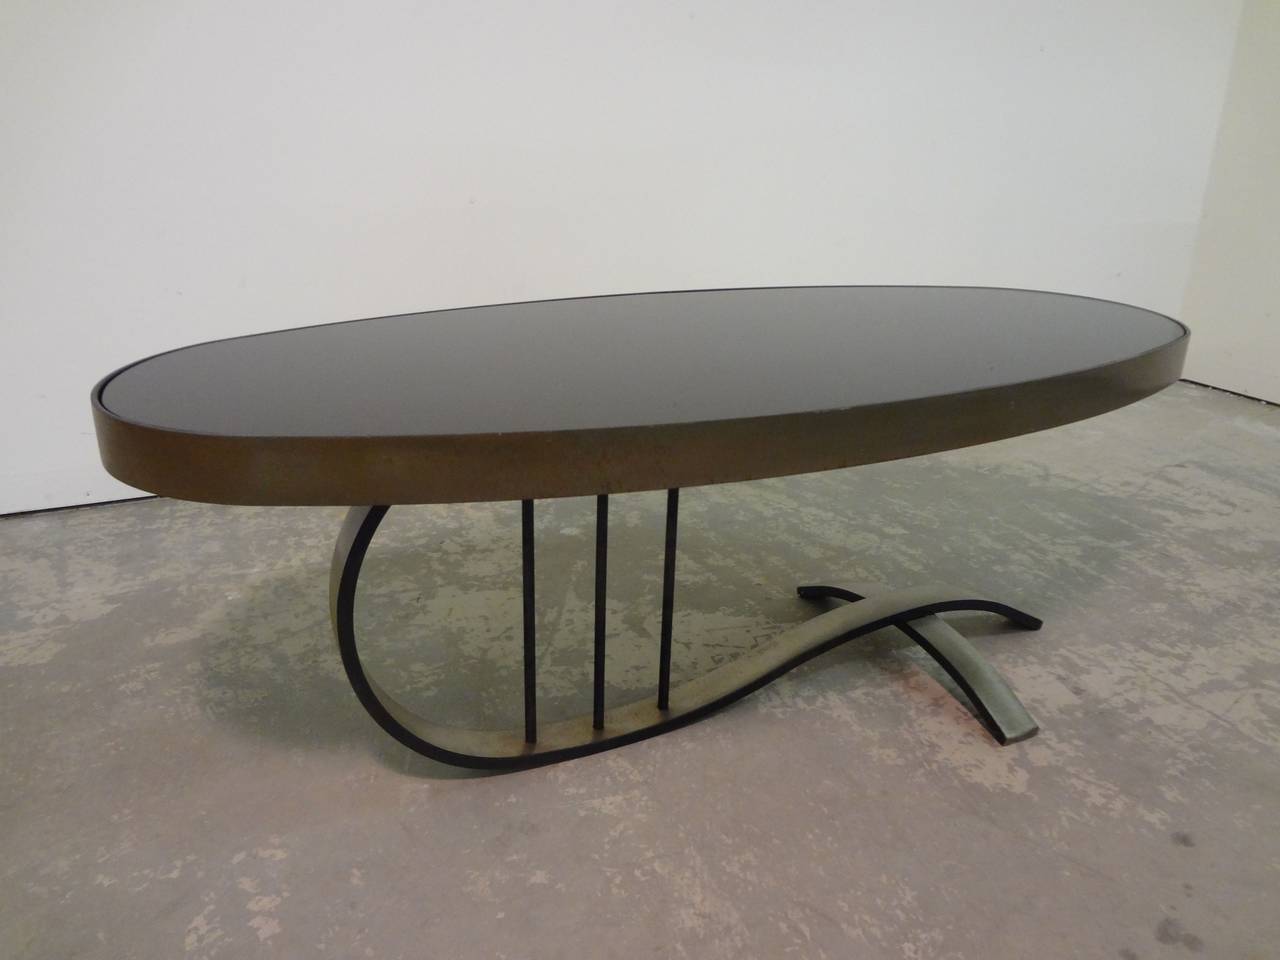 Sophisticated French cantilevered cocktail table, circa 1960s. Very heavy metal frame, looks to be solid steel with some sort of patinated bronze finish. Black under painted glass top in excellent condition and patina to the table base as expected